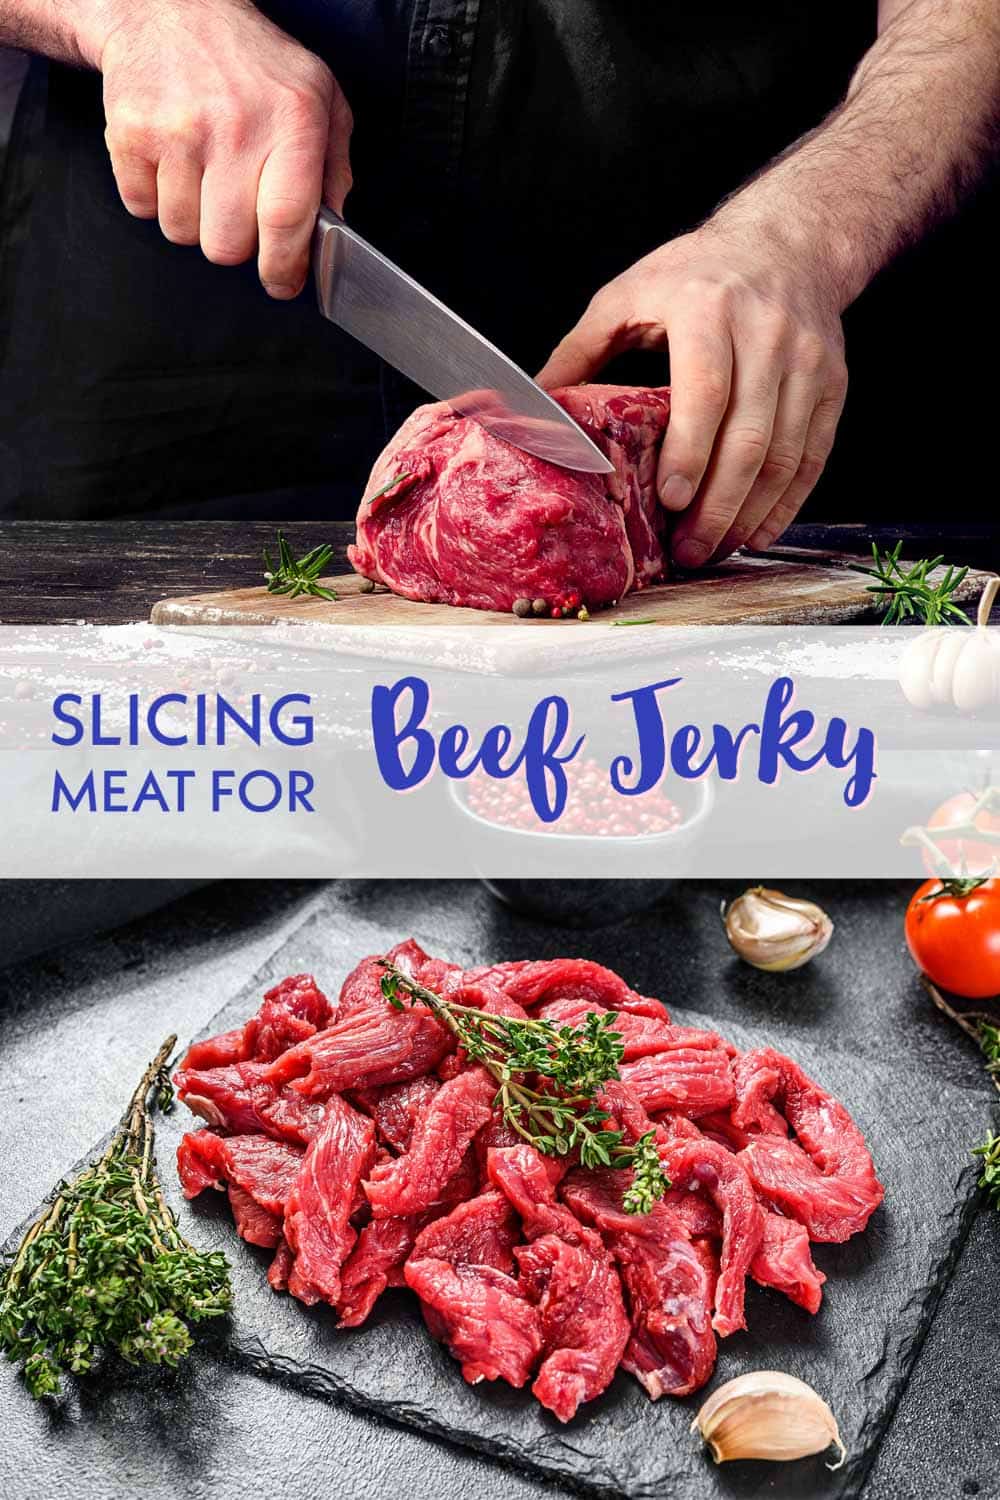 Slicing Meat for Beef Jerky